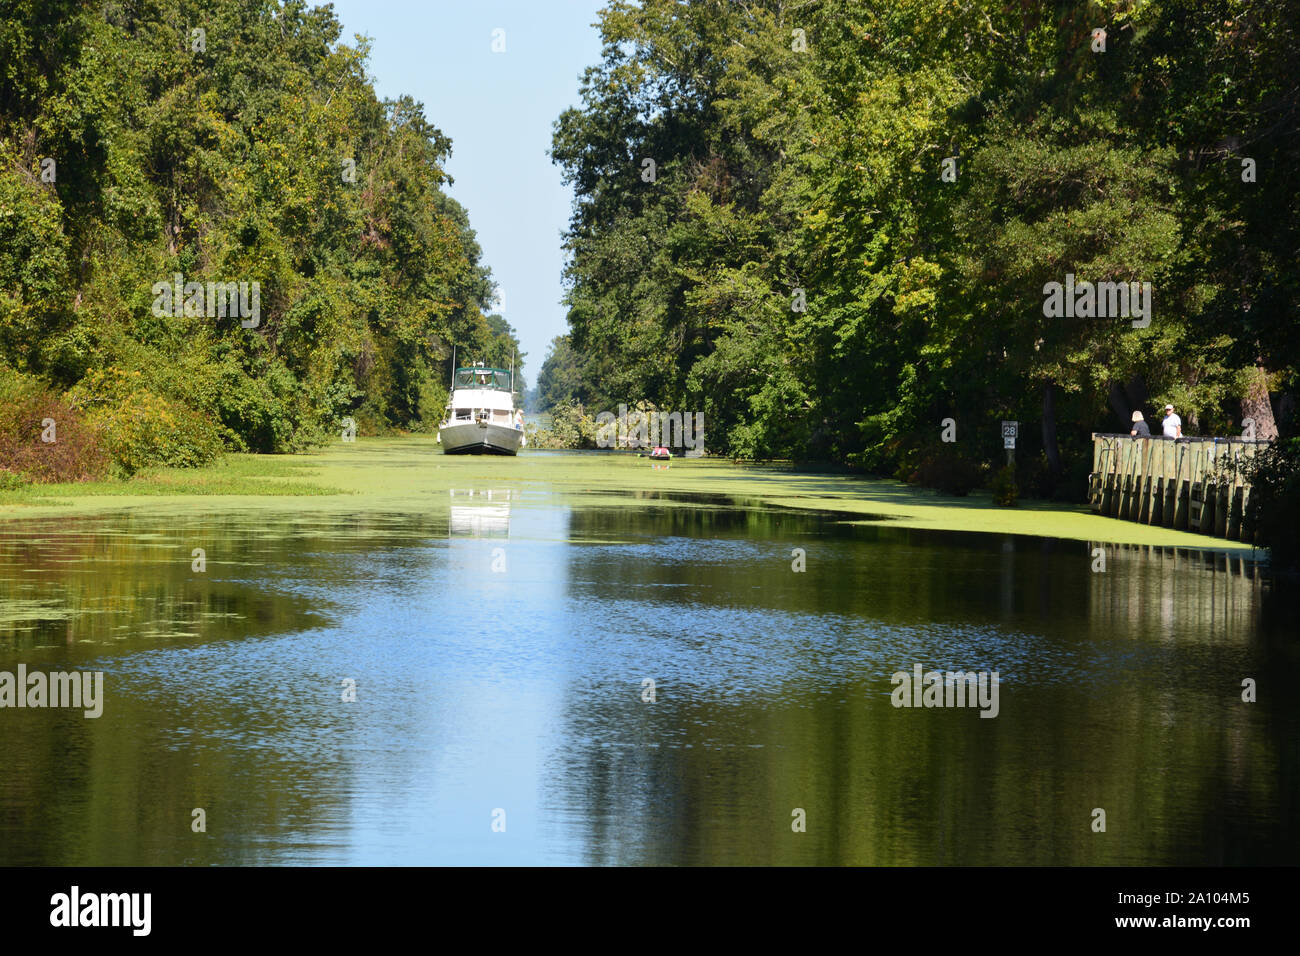 A boat travels south on the Intracoastal Waterway through the Great Dismal Swamp State Park outside of Camden North Carolina. Stock Photo